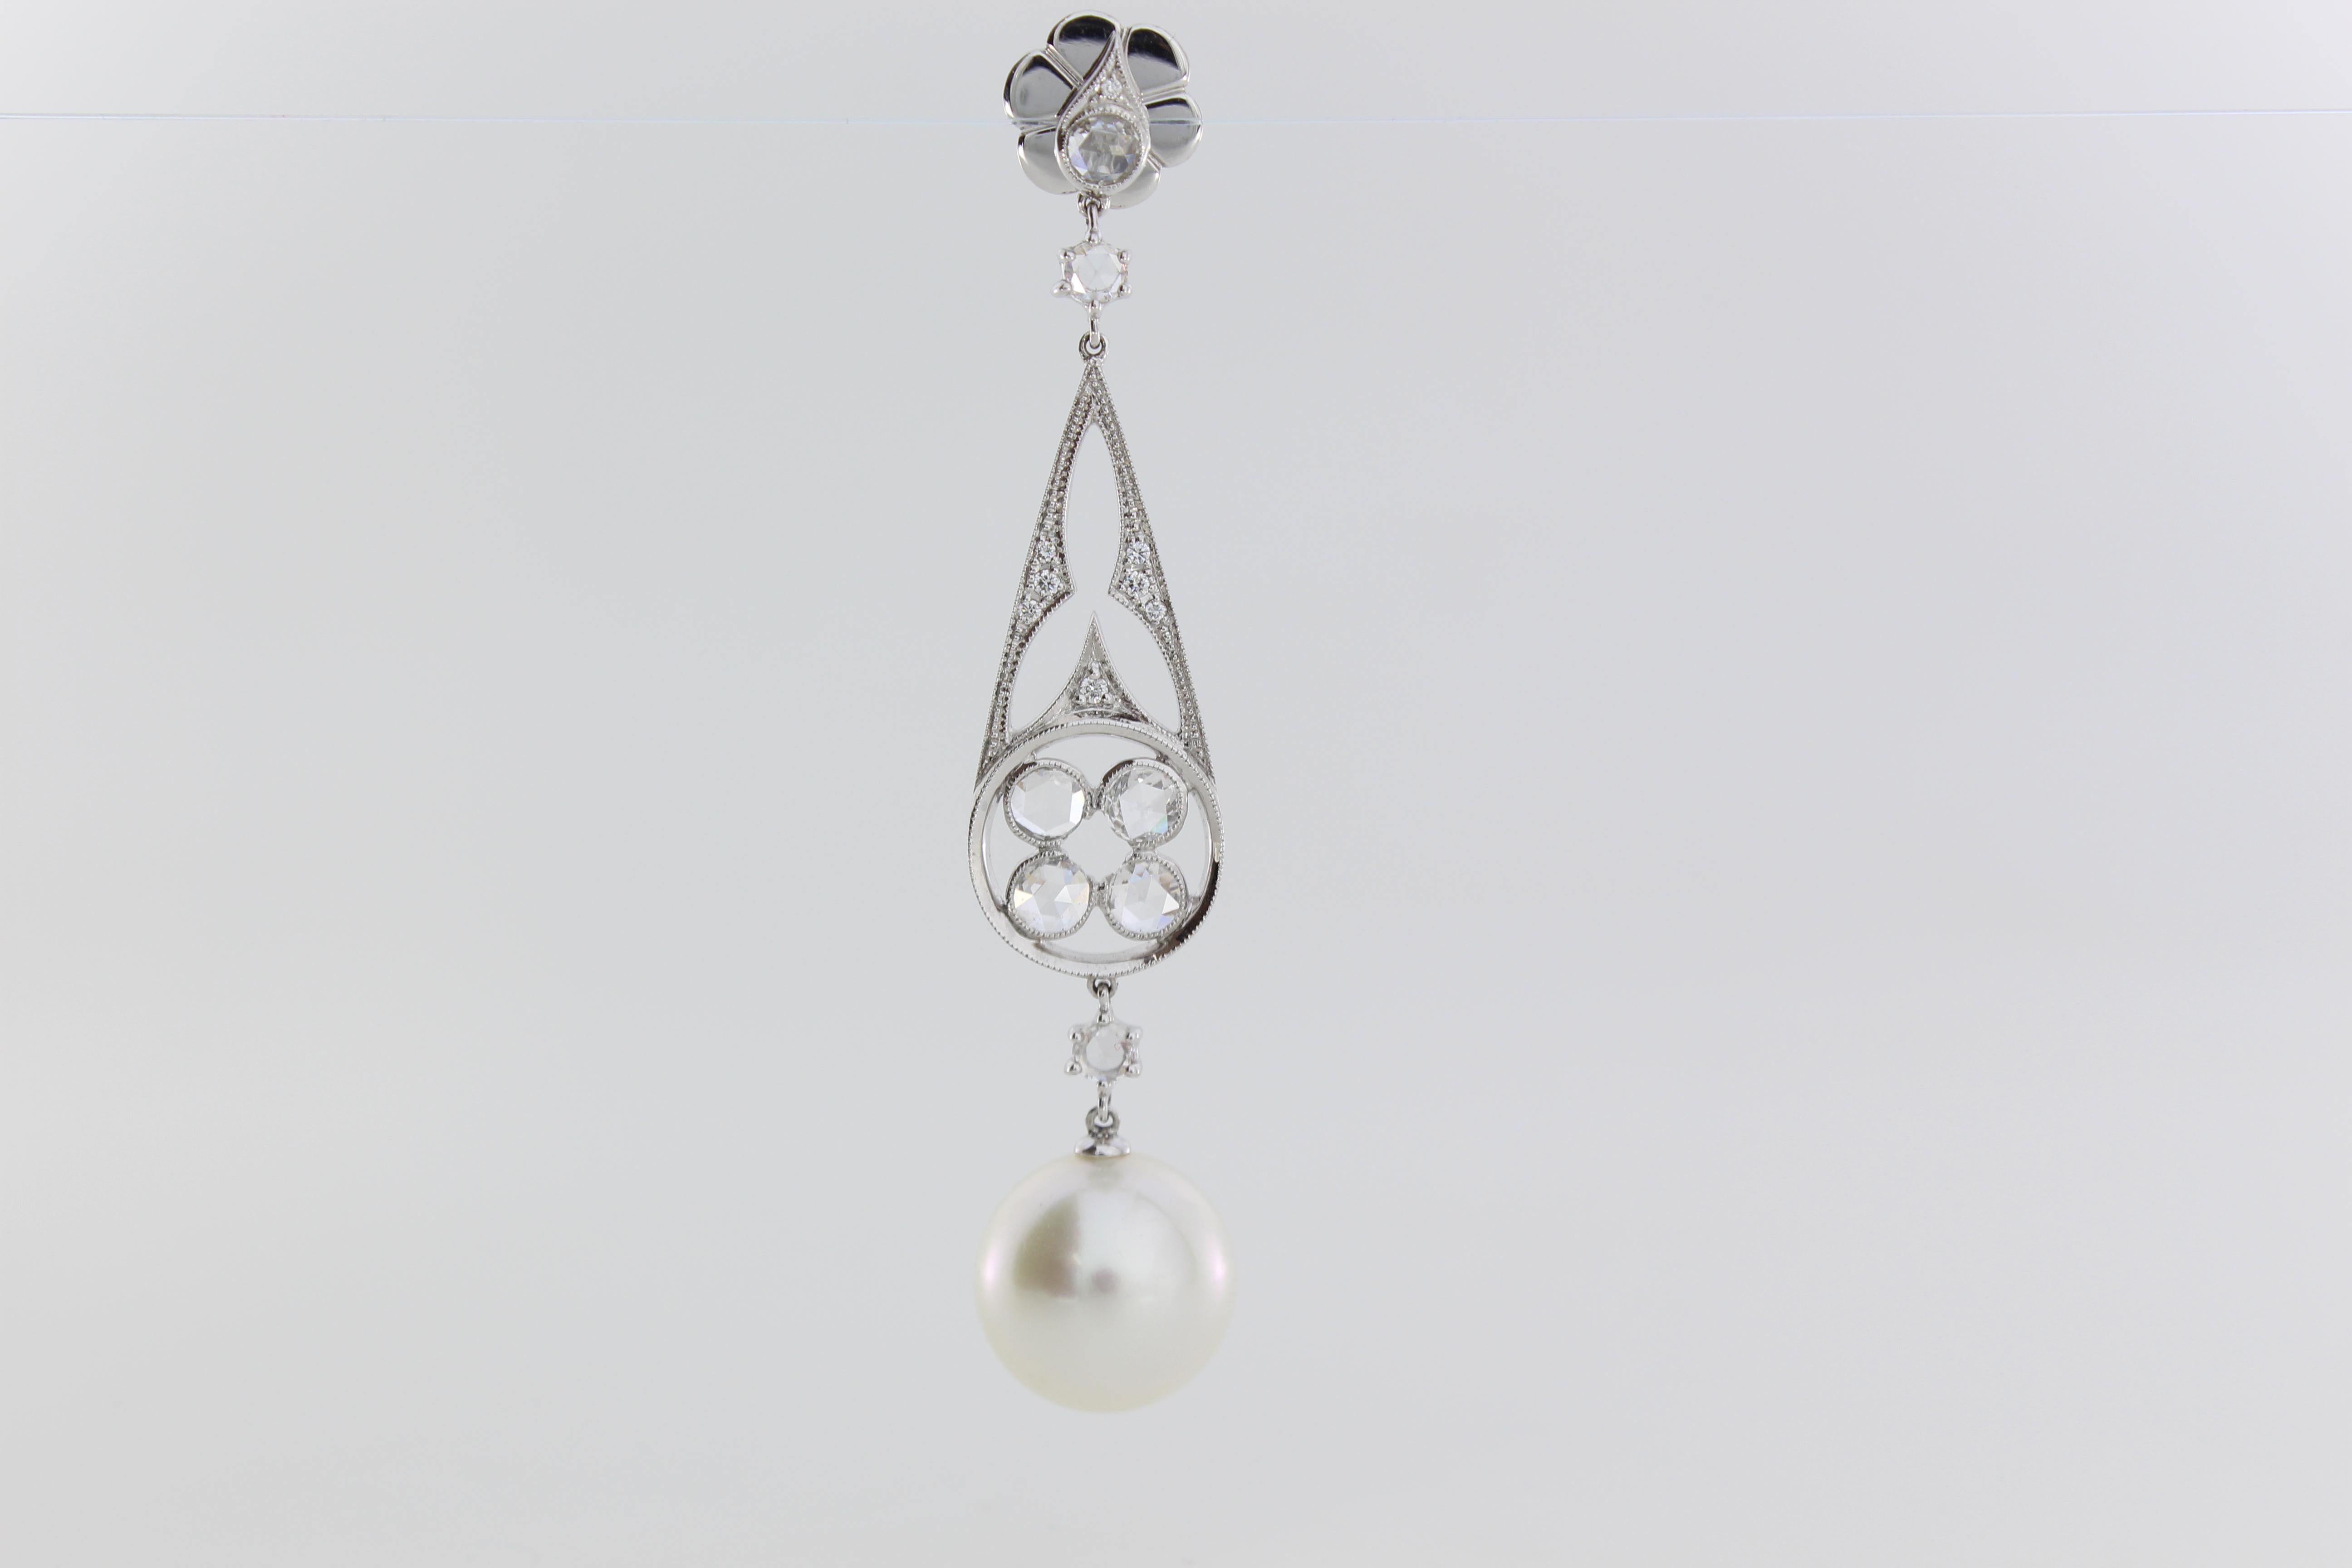 18k White Gold with White Diamonds(2.17ct) and 13mm Round Near Round White South Sea Pearls 